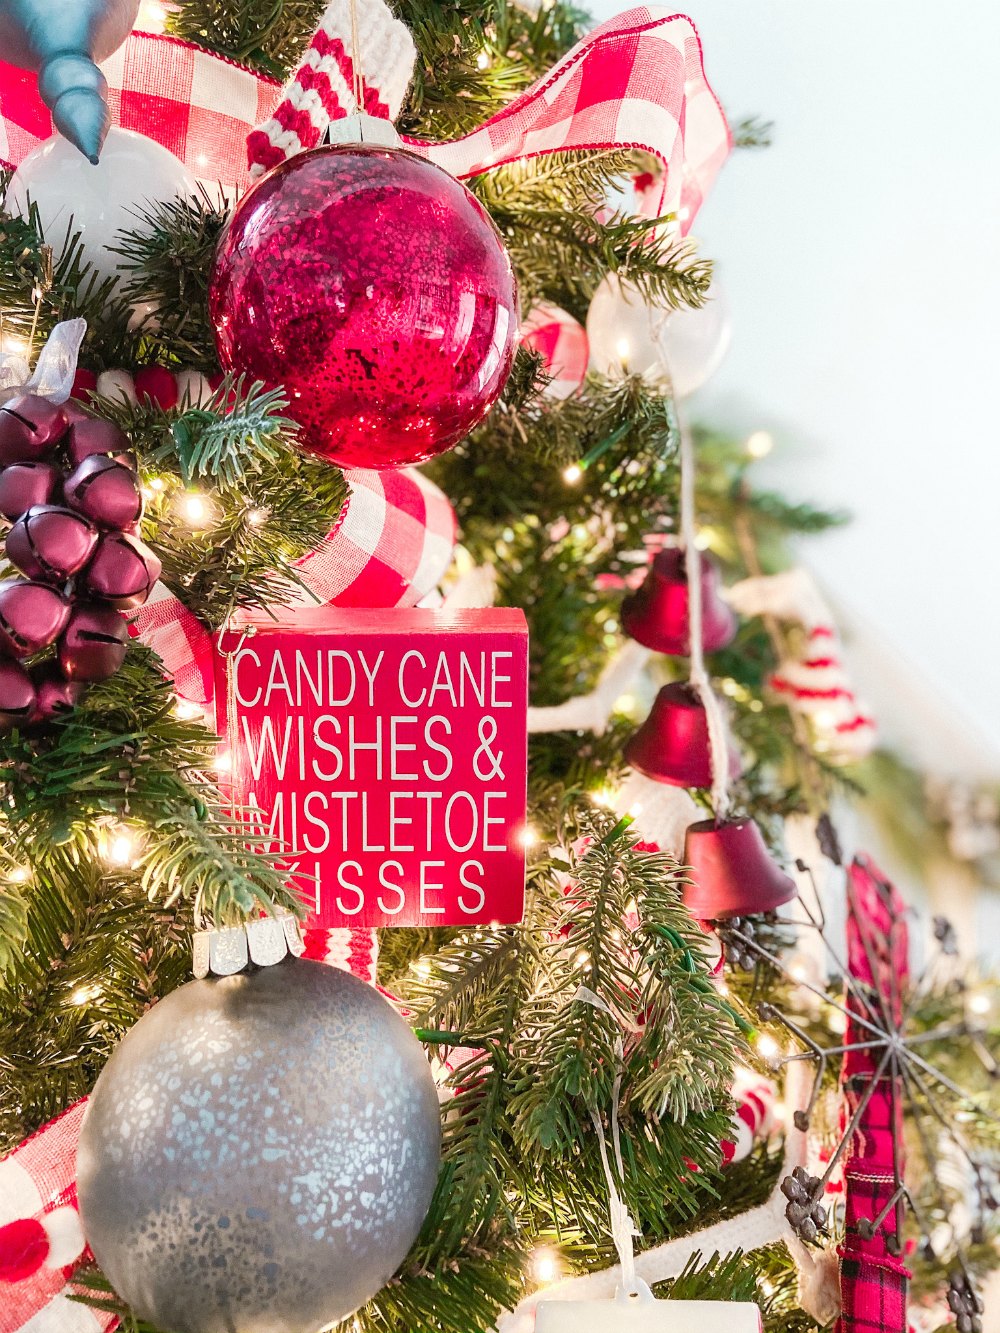 Candy Cane Themed Christmas Tree. Celebrate Christmas with a festive red and white tree filled with candy cane-themed projects, bells and felted garlands. 